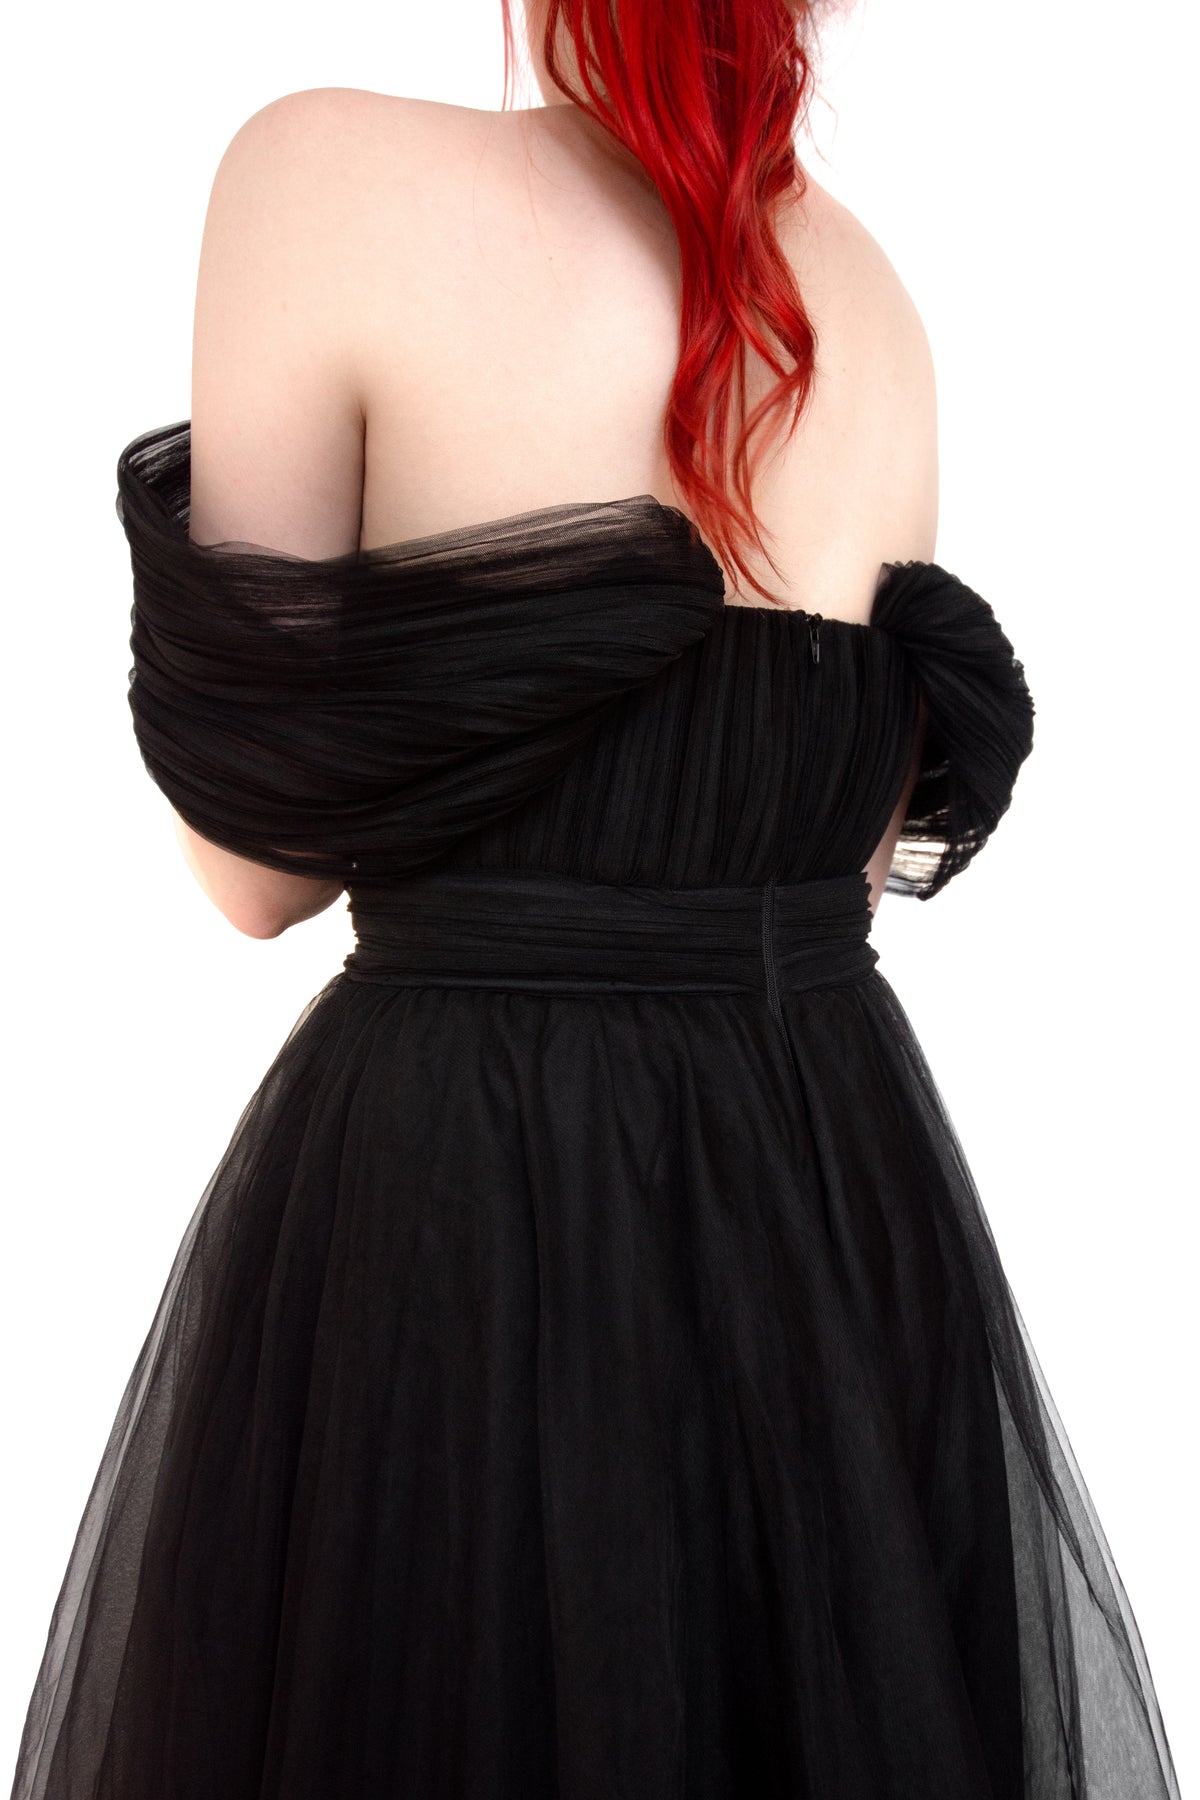 Elegant long flowing black tulle gown. Perfect for any goth wedding or special event! Off the shoulder, draping tulle sleeves and a mini V at the bust.